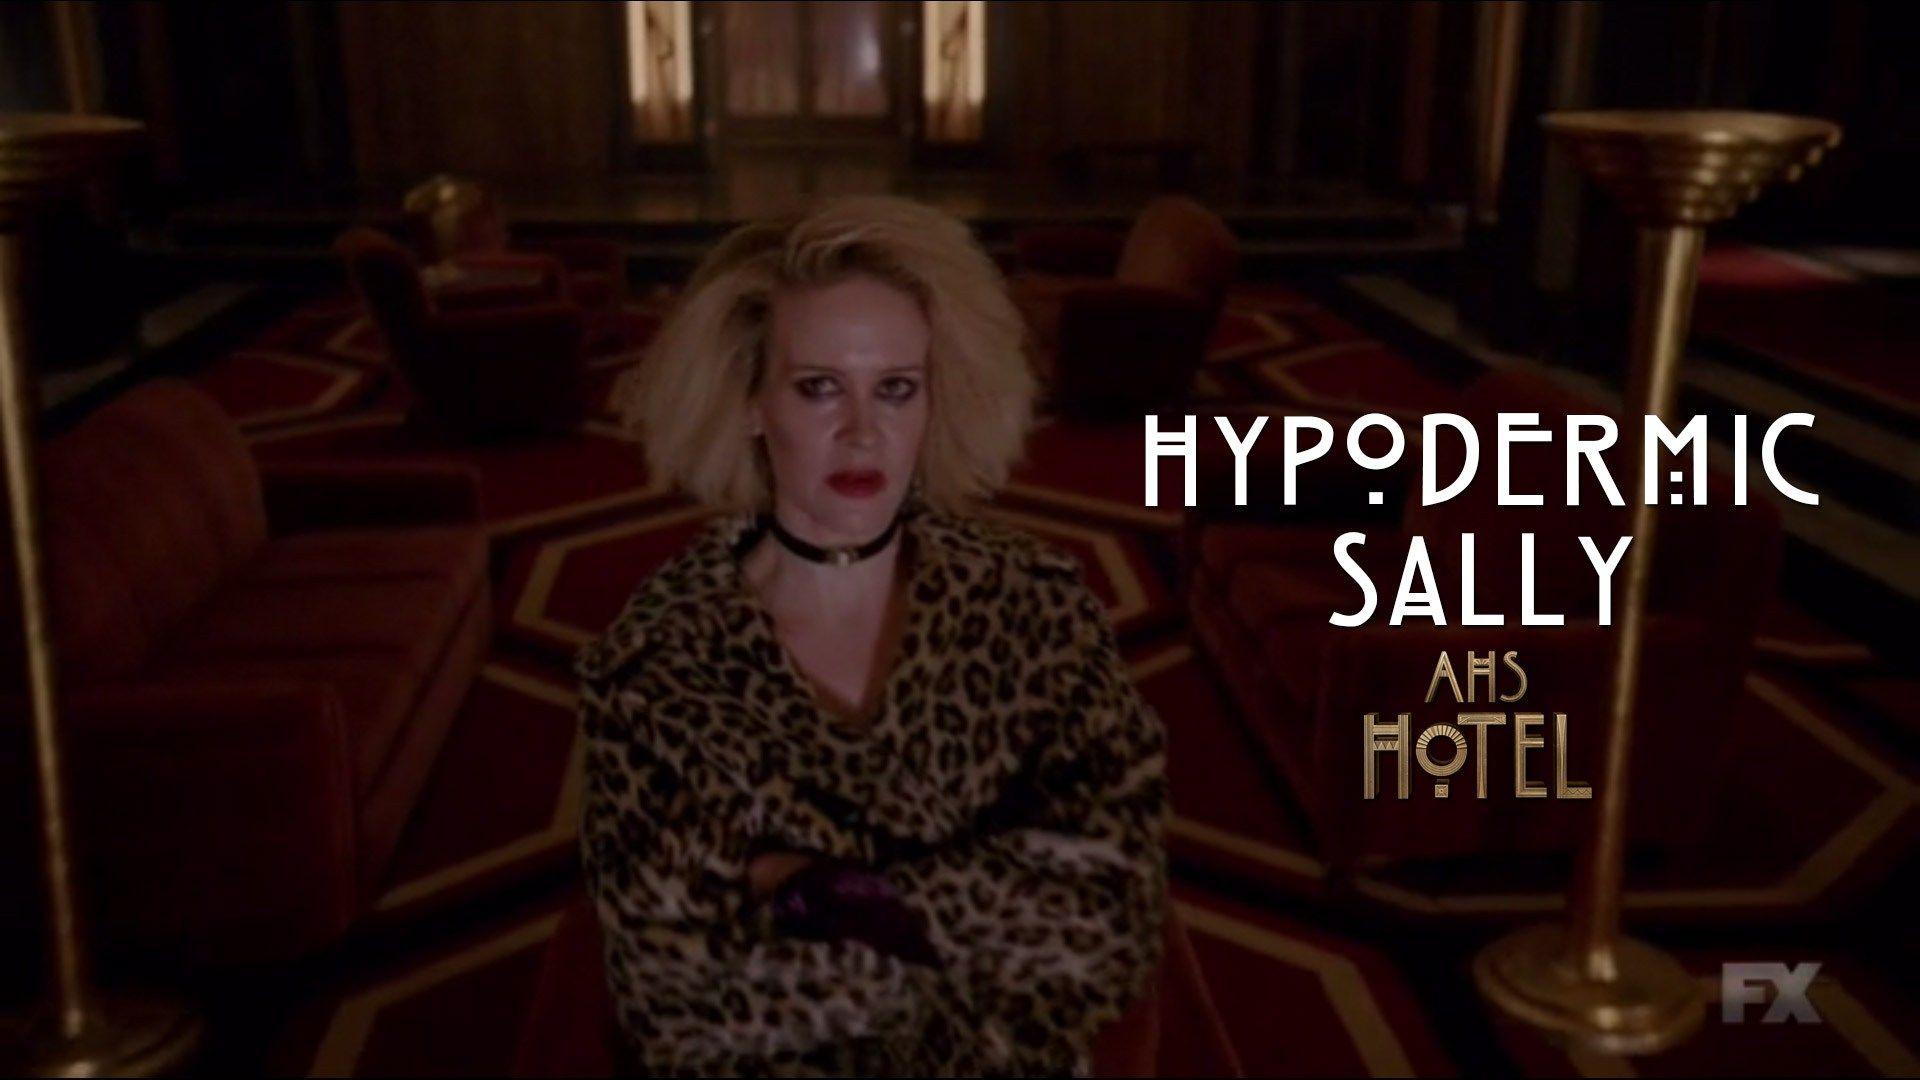 American Horror Story: Characters